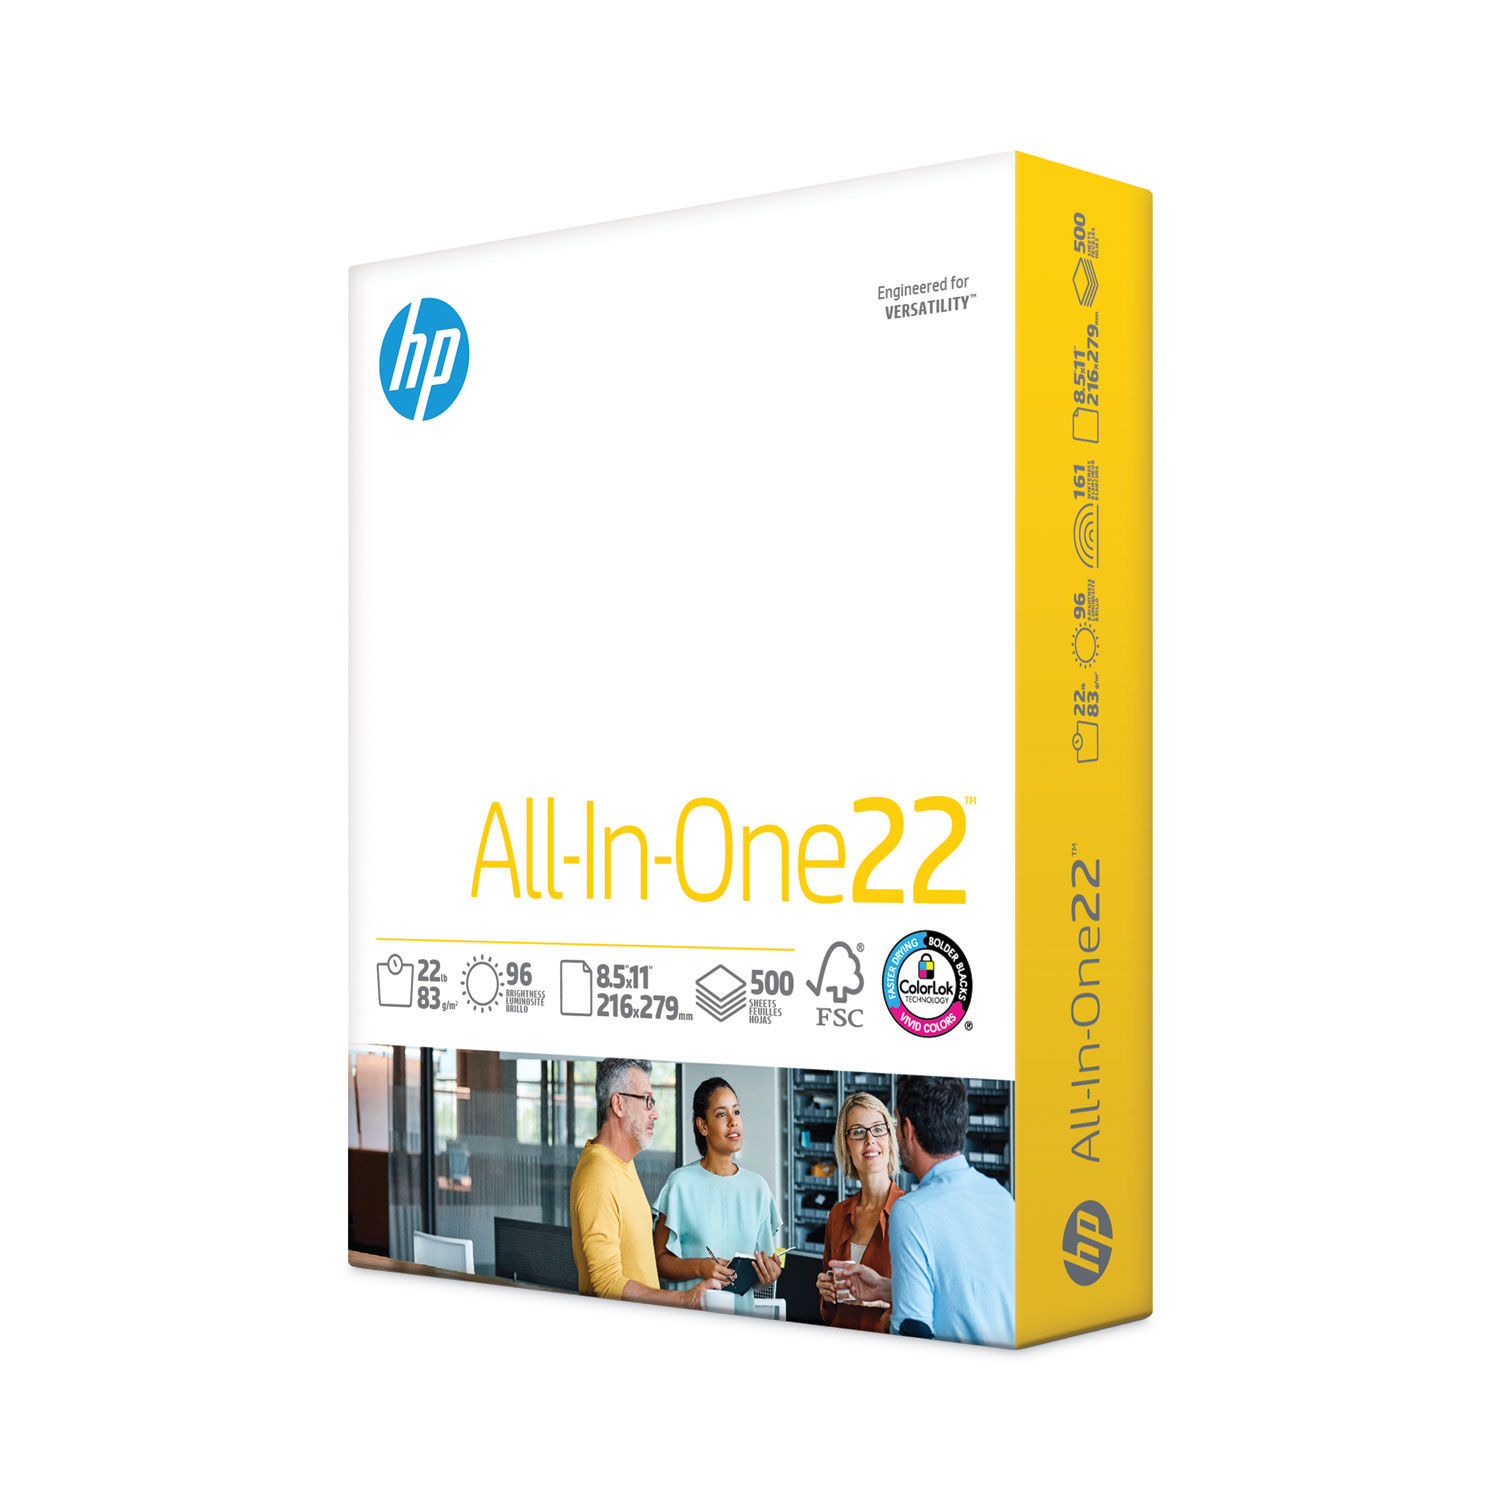 All-In-One22 Paper 96 Bright, 22 lb Bond Weight, 8.5 x 11, White, 500/Ream